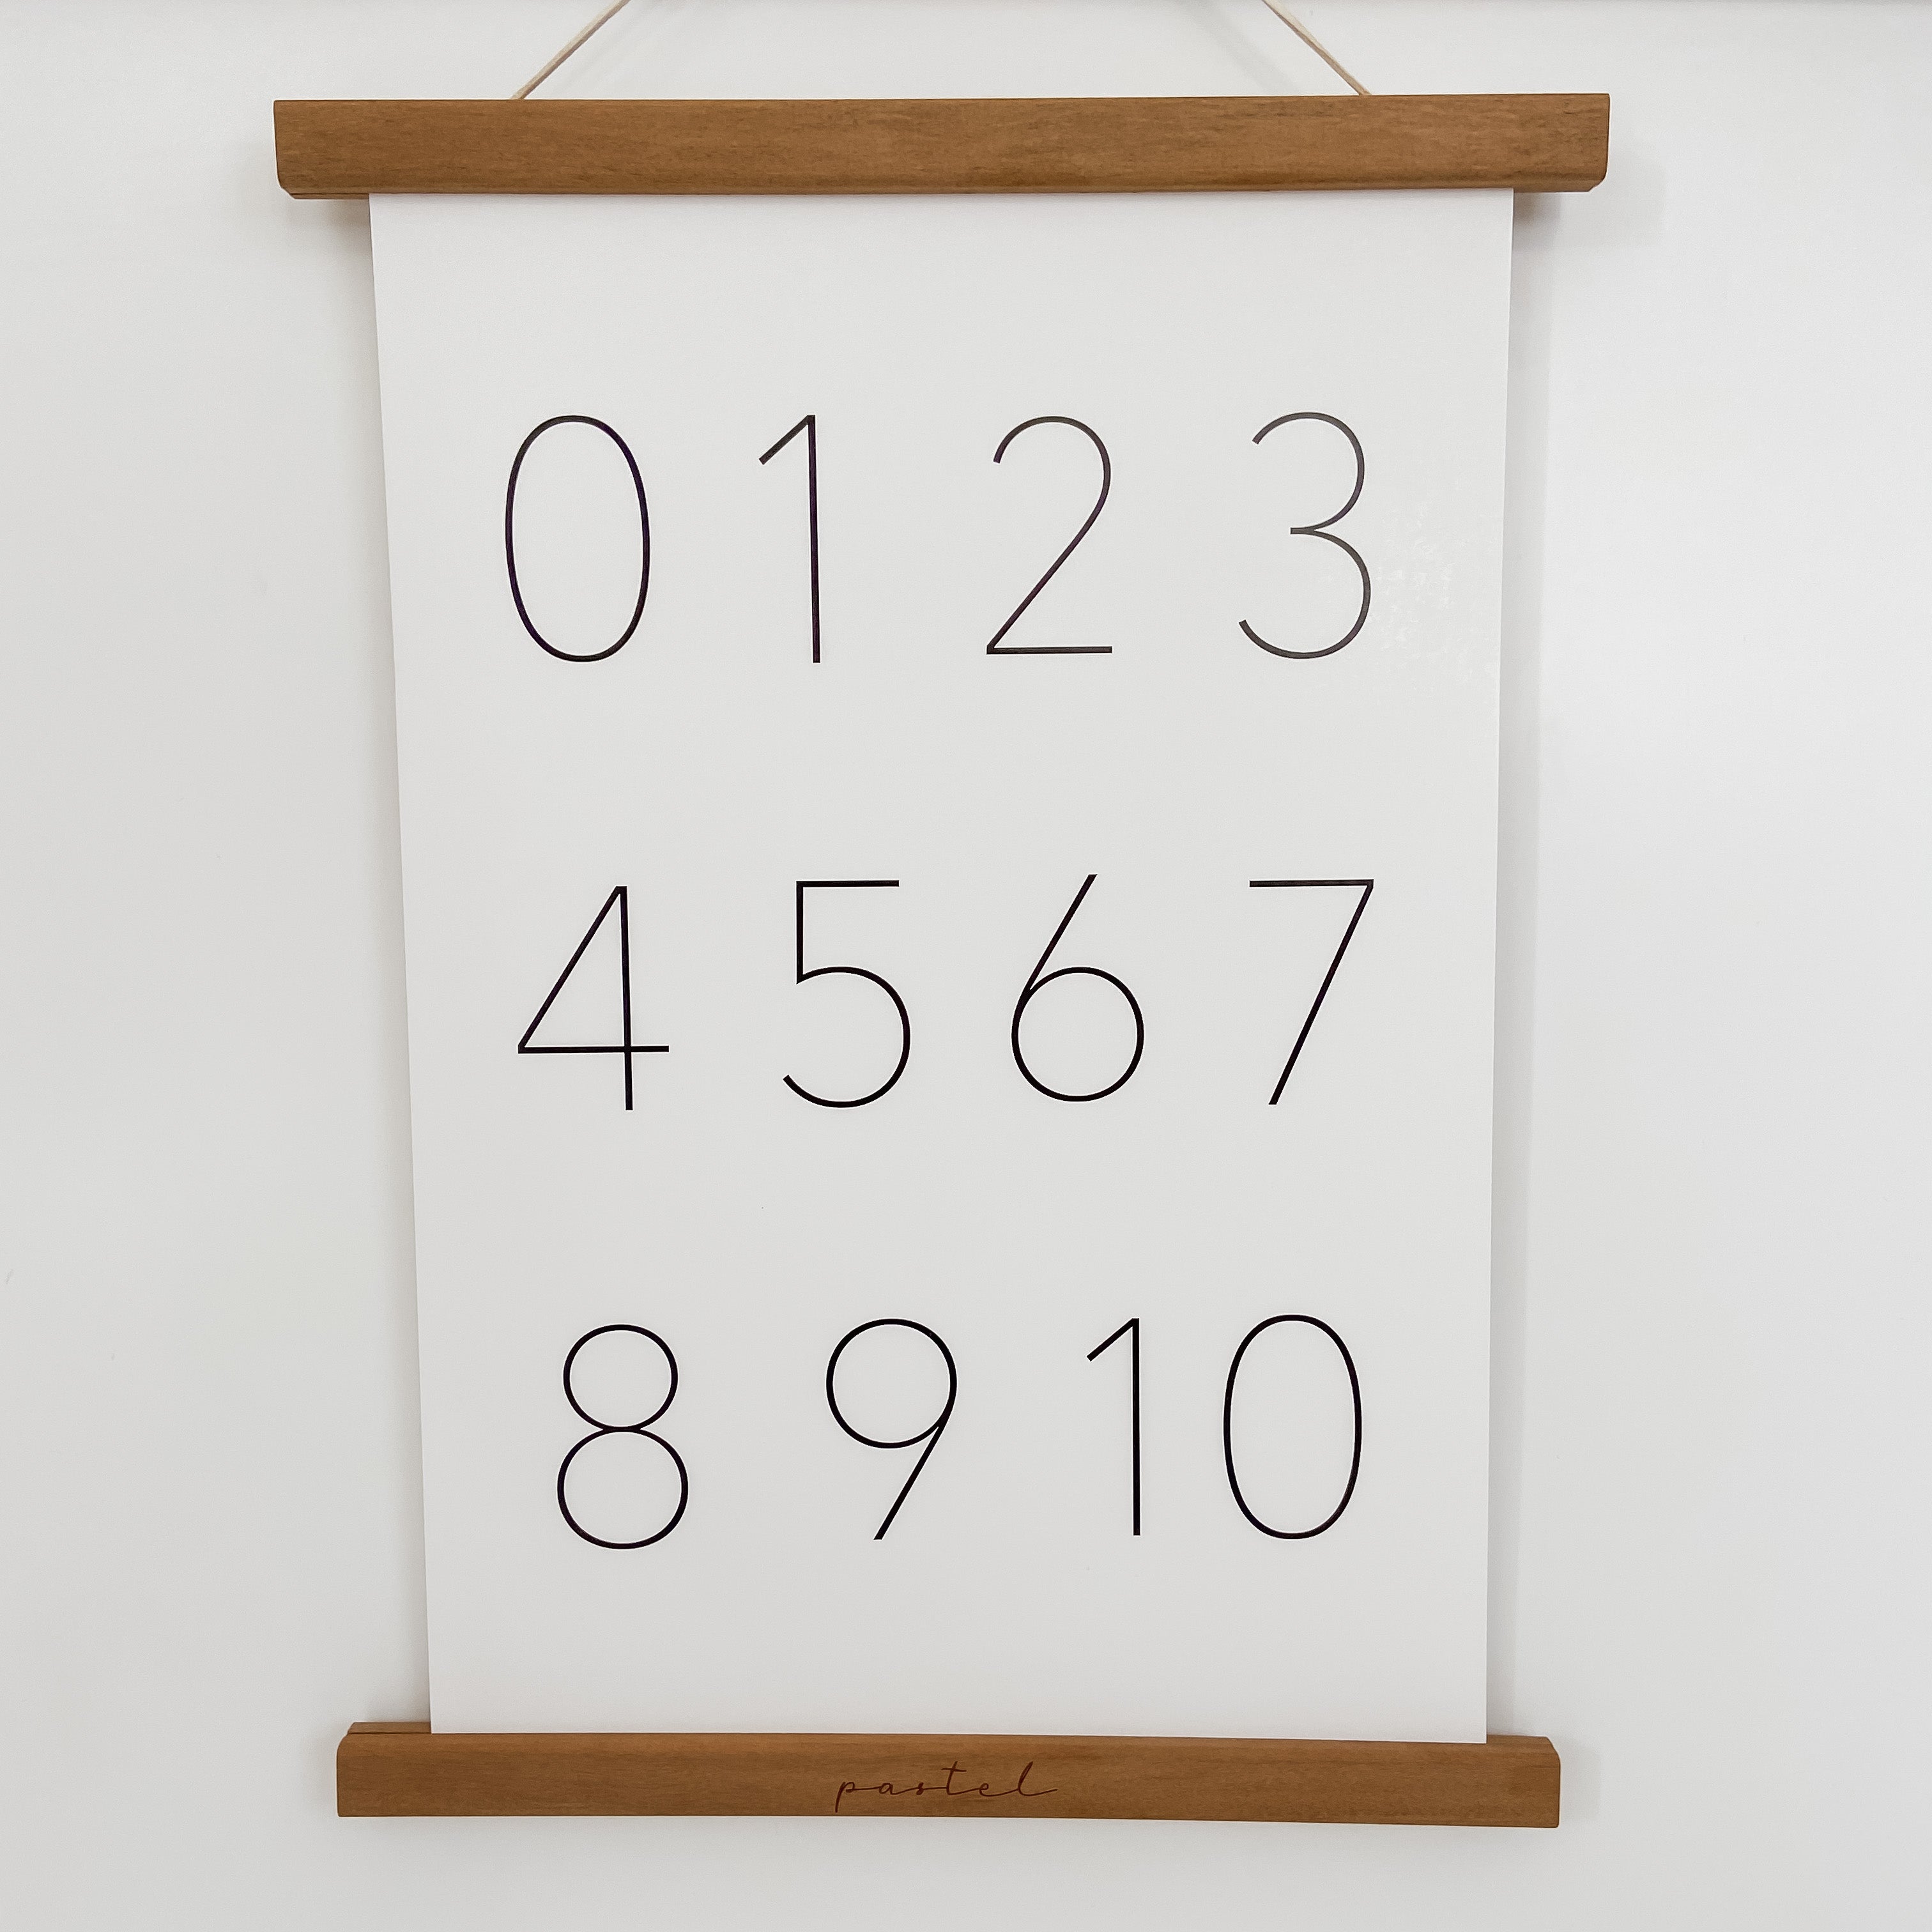 Decorative & Educational Poster "Numbers"